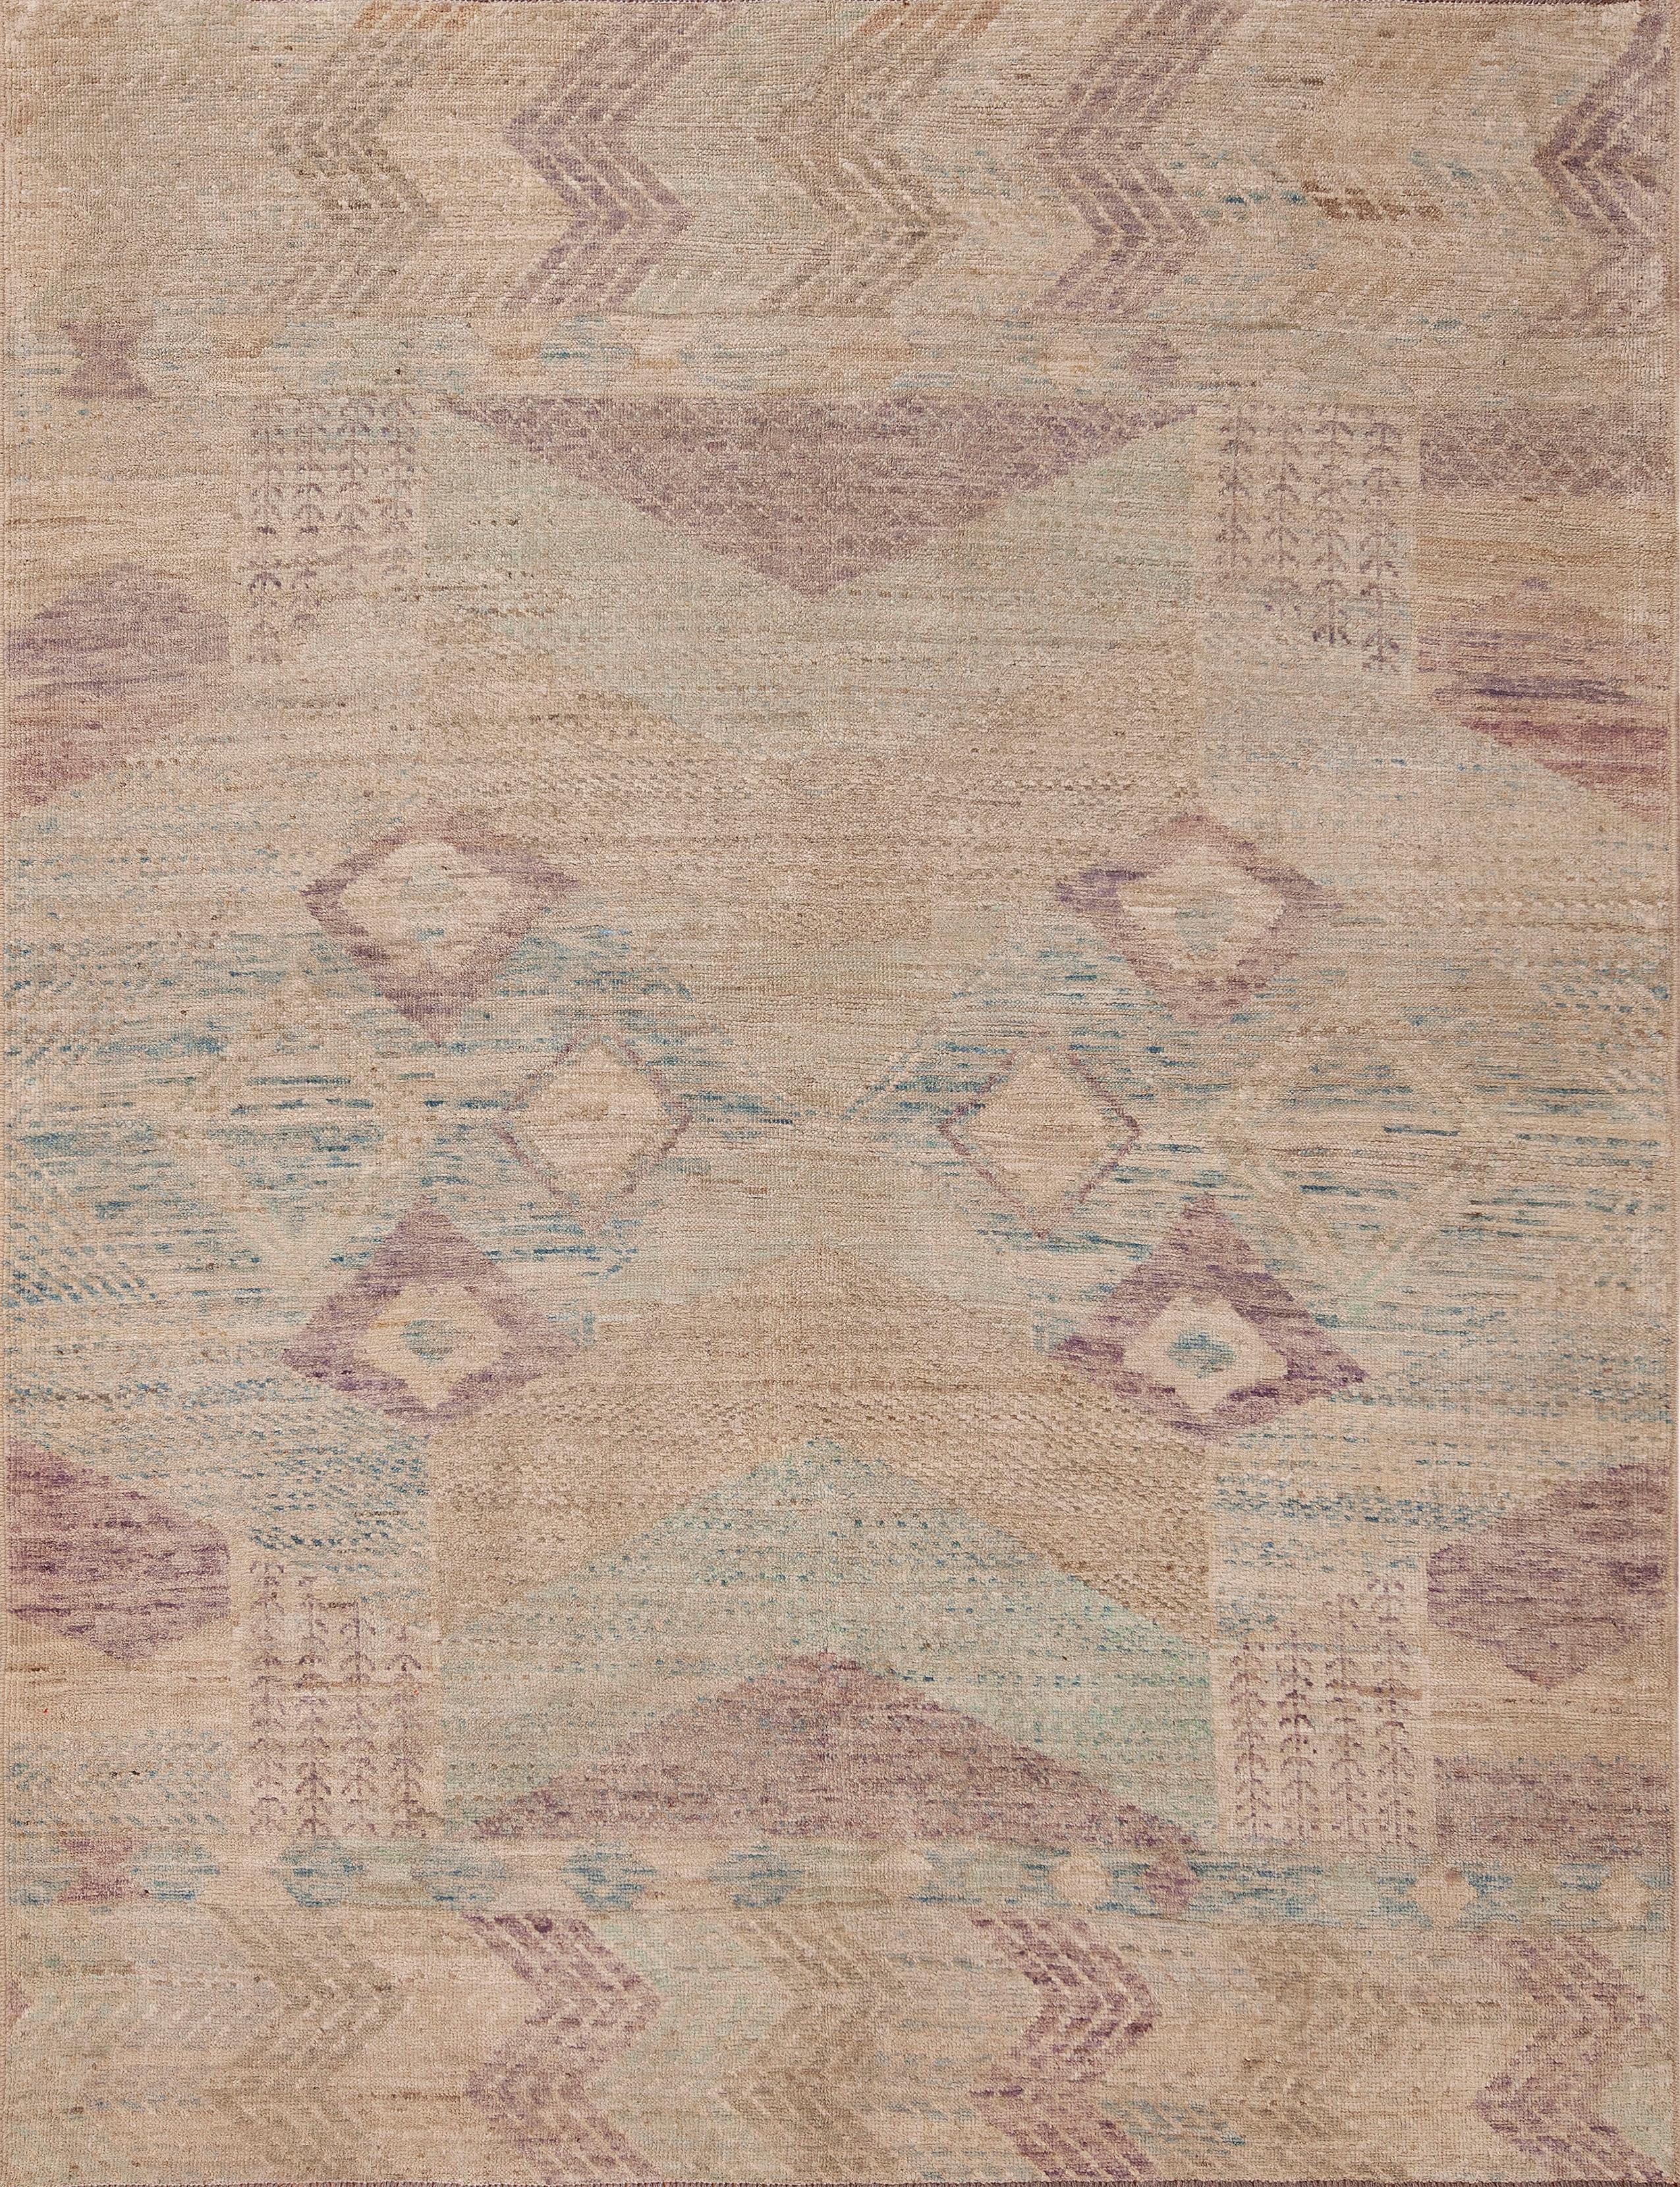 Decorative Soft Color Nomadic Design Modern Contemporary Wool Area Rug, Country of origin: Central Asia, circa date: Modern Rugs